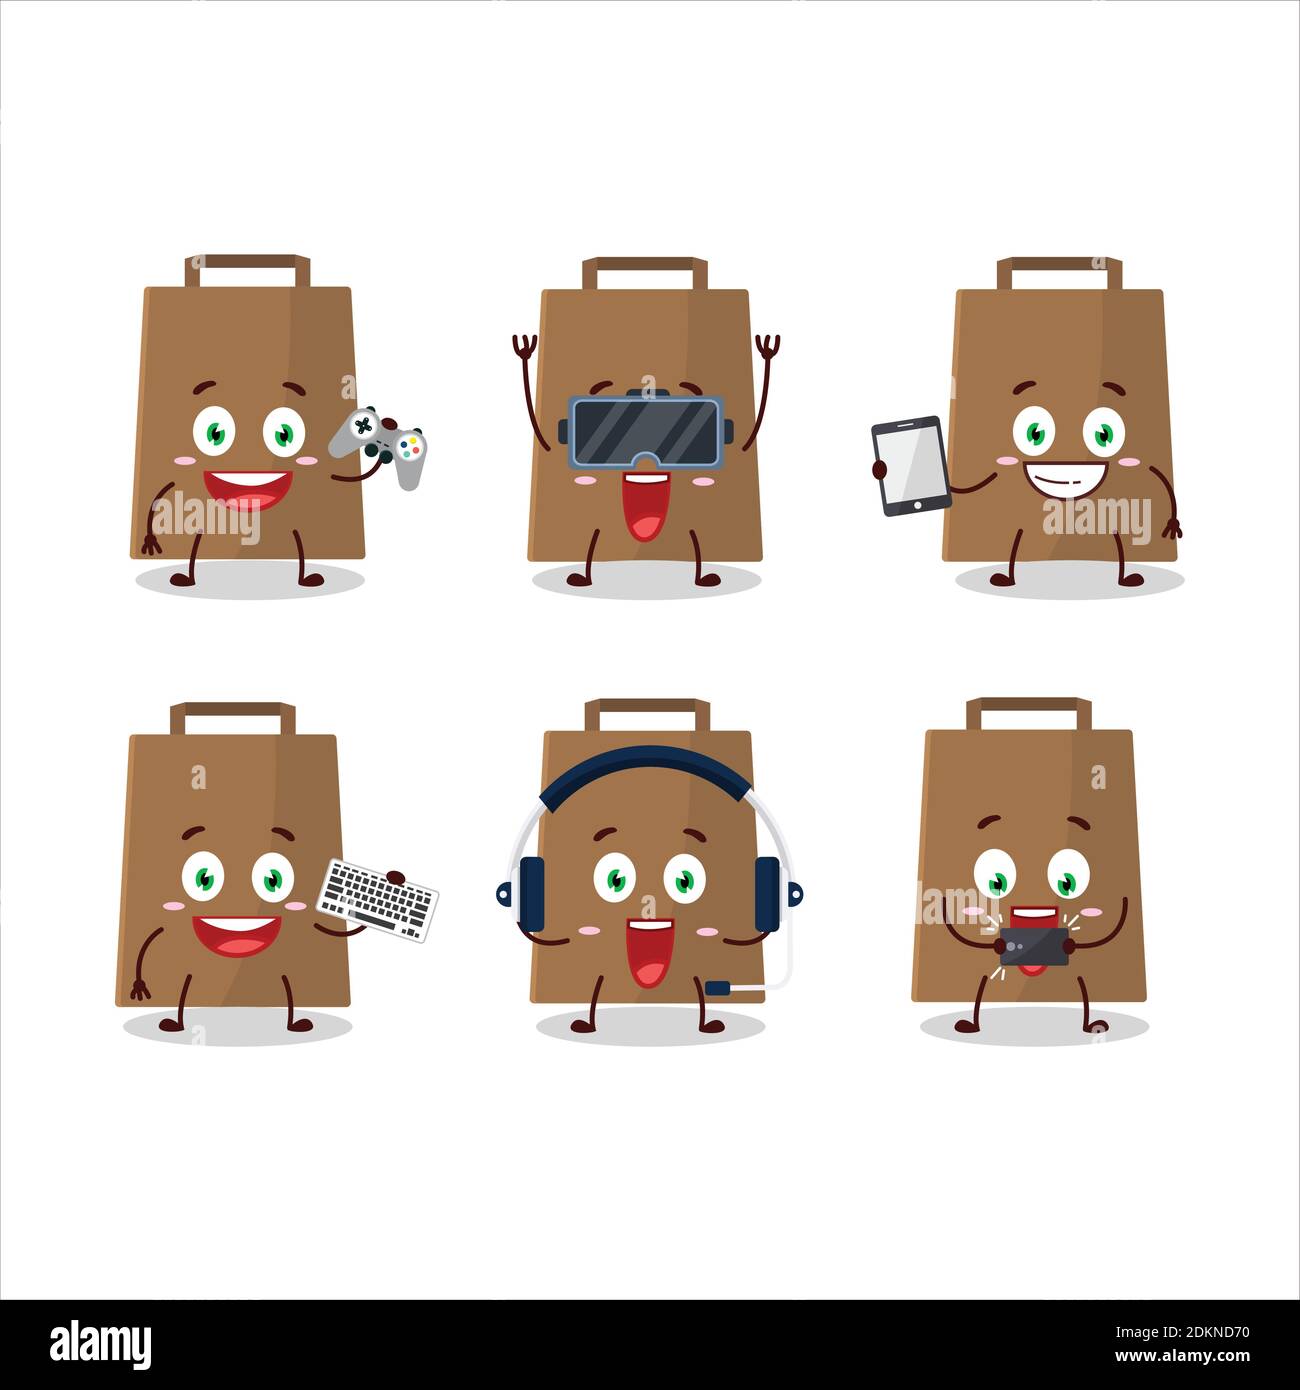 Papper bag cartoon character are playing games with various cute emoticons. Vector illustration Stock Vector